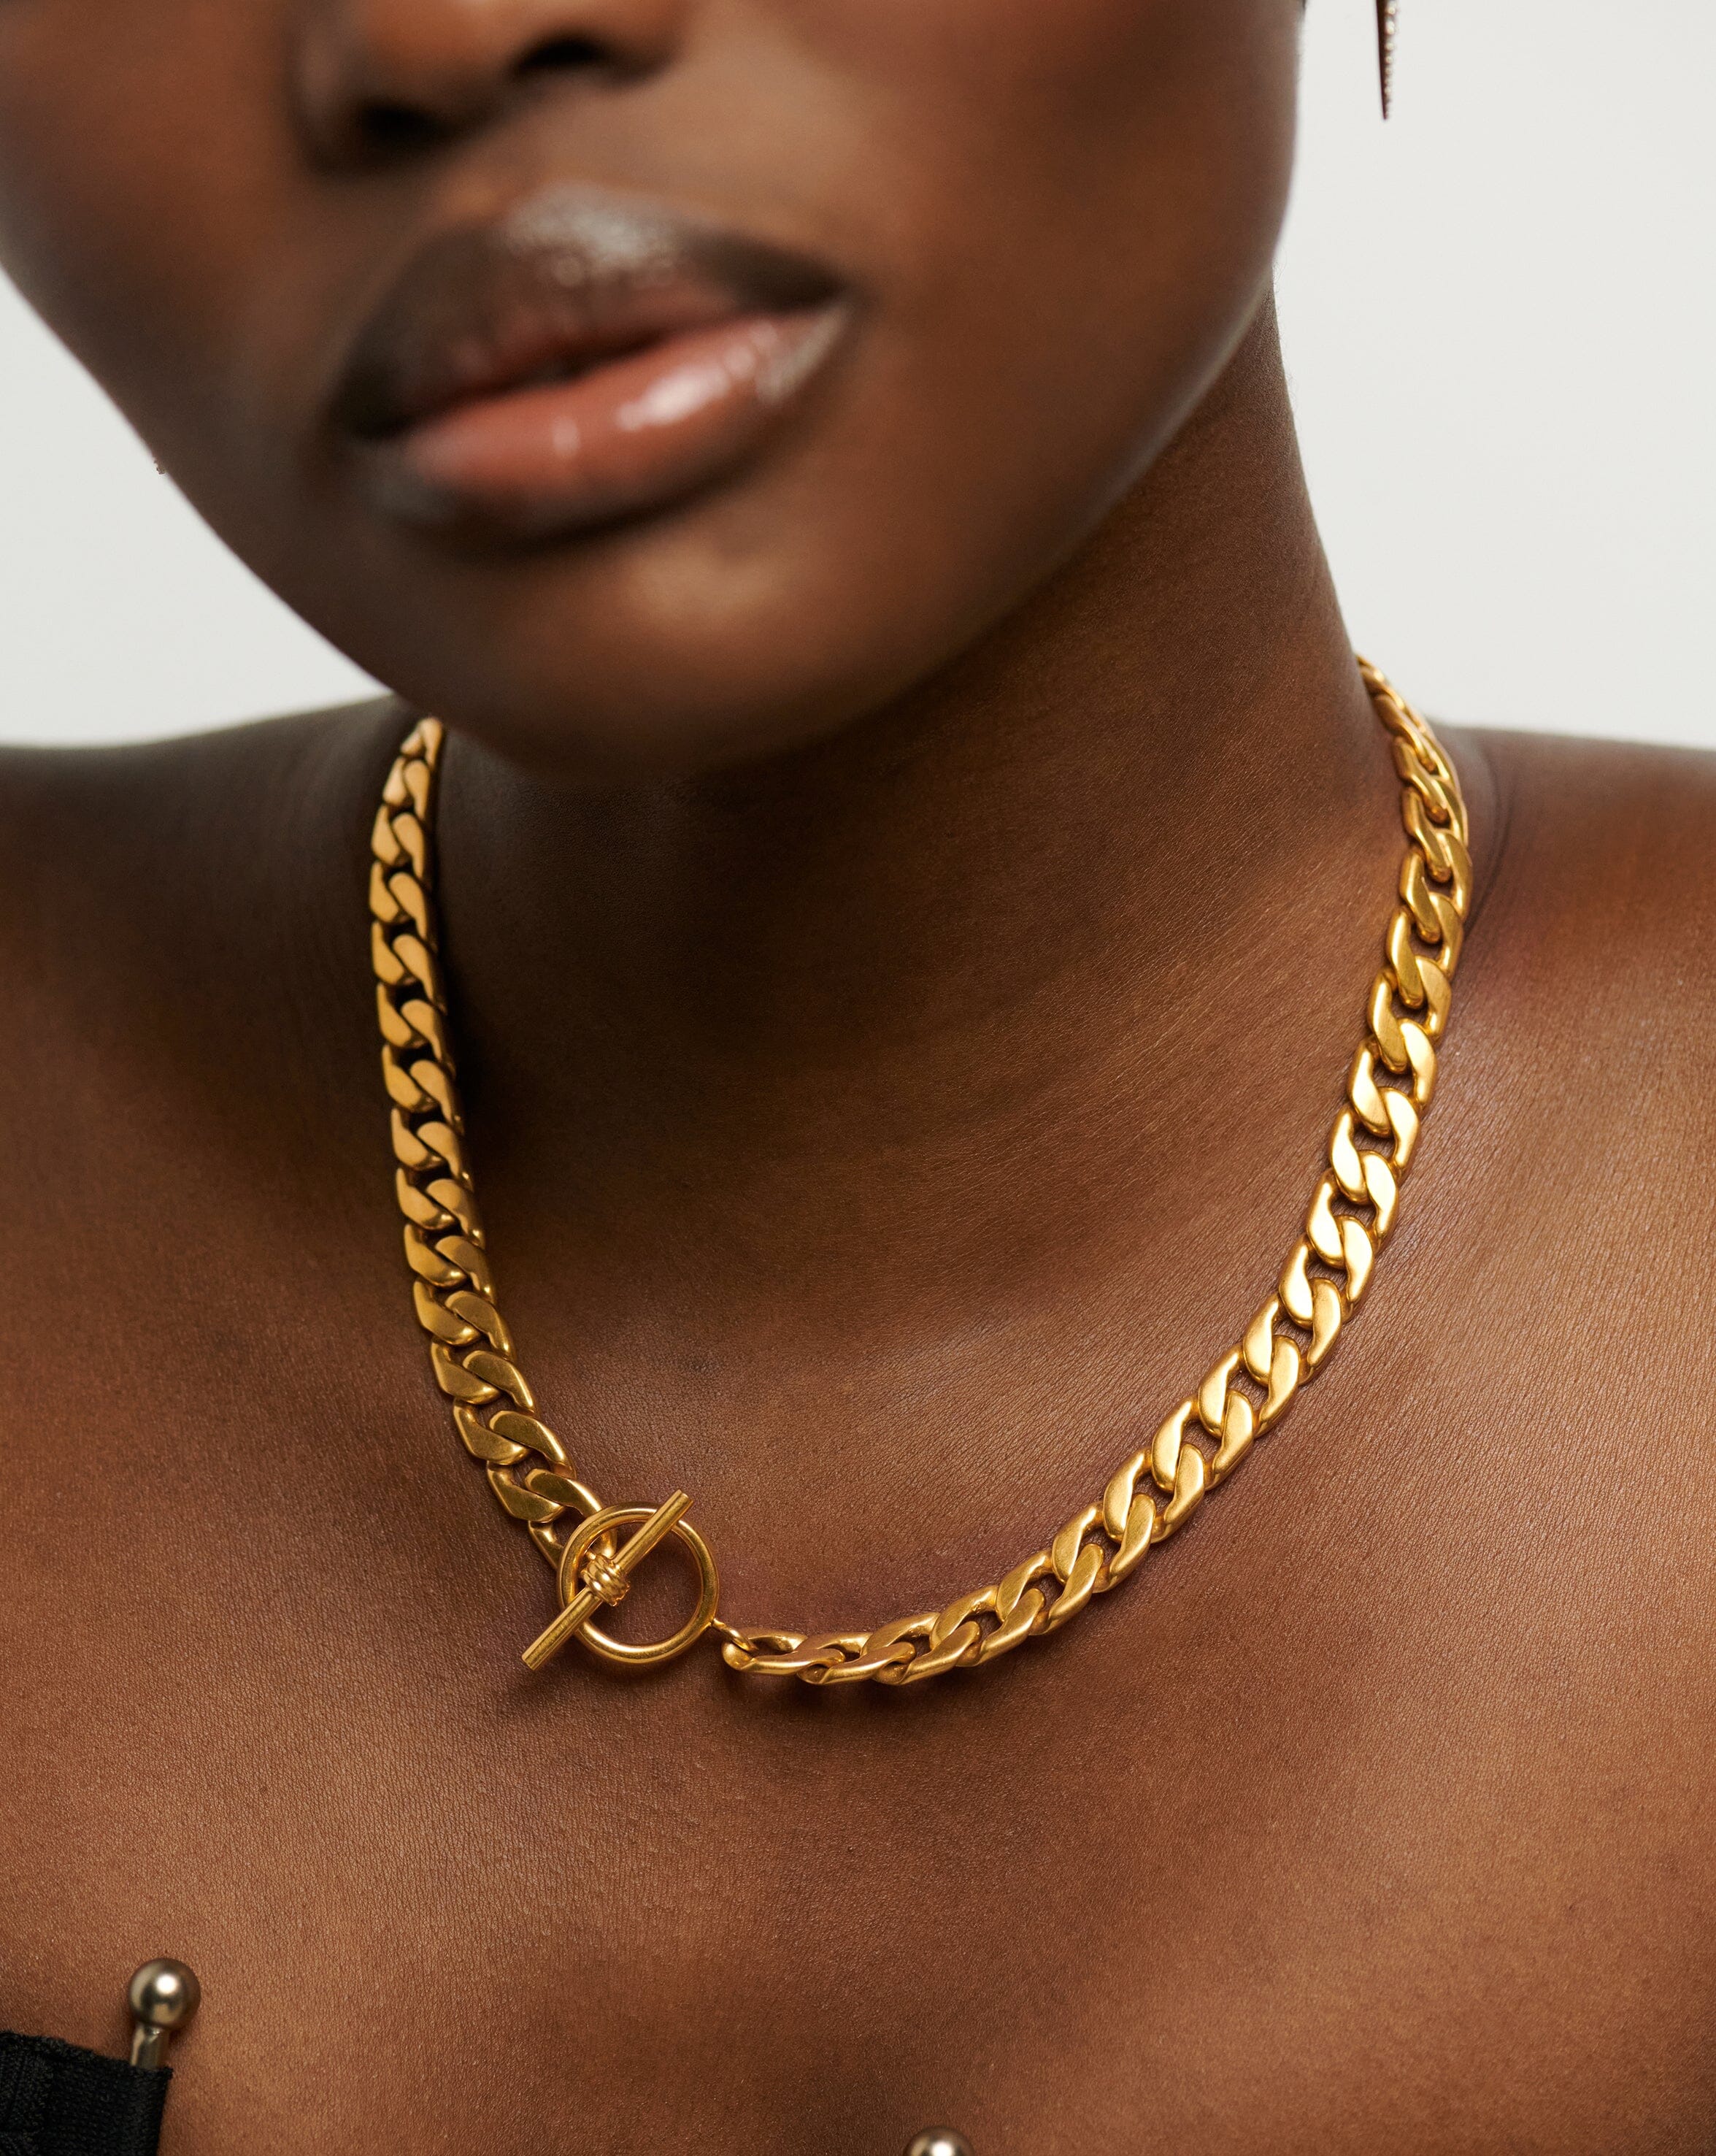 Chunky Gold Chain Necklace 